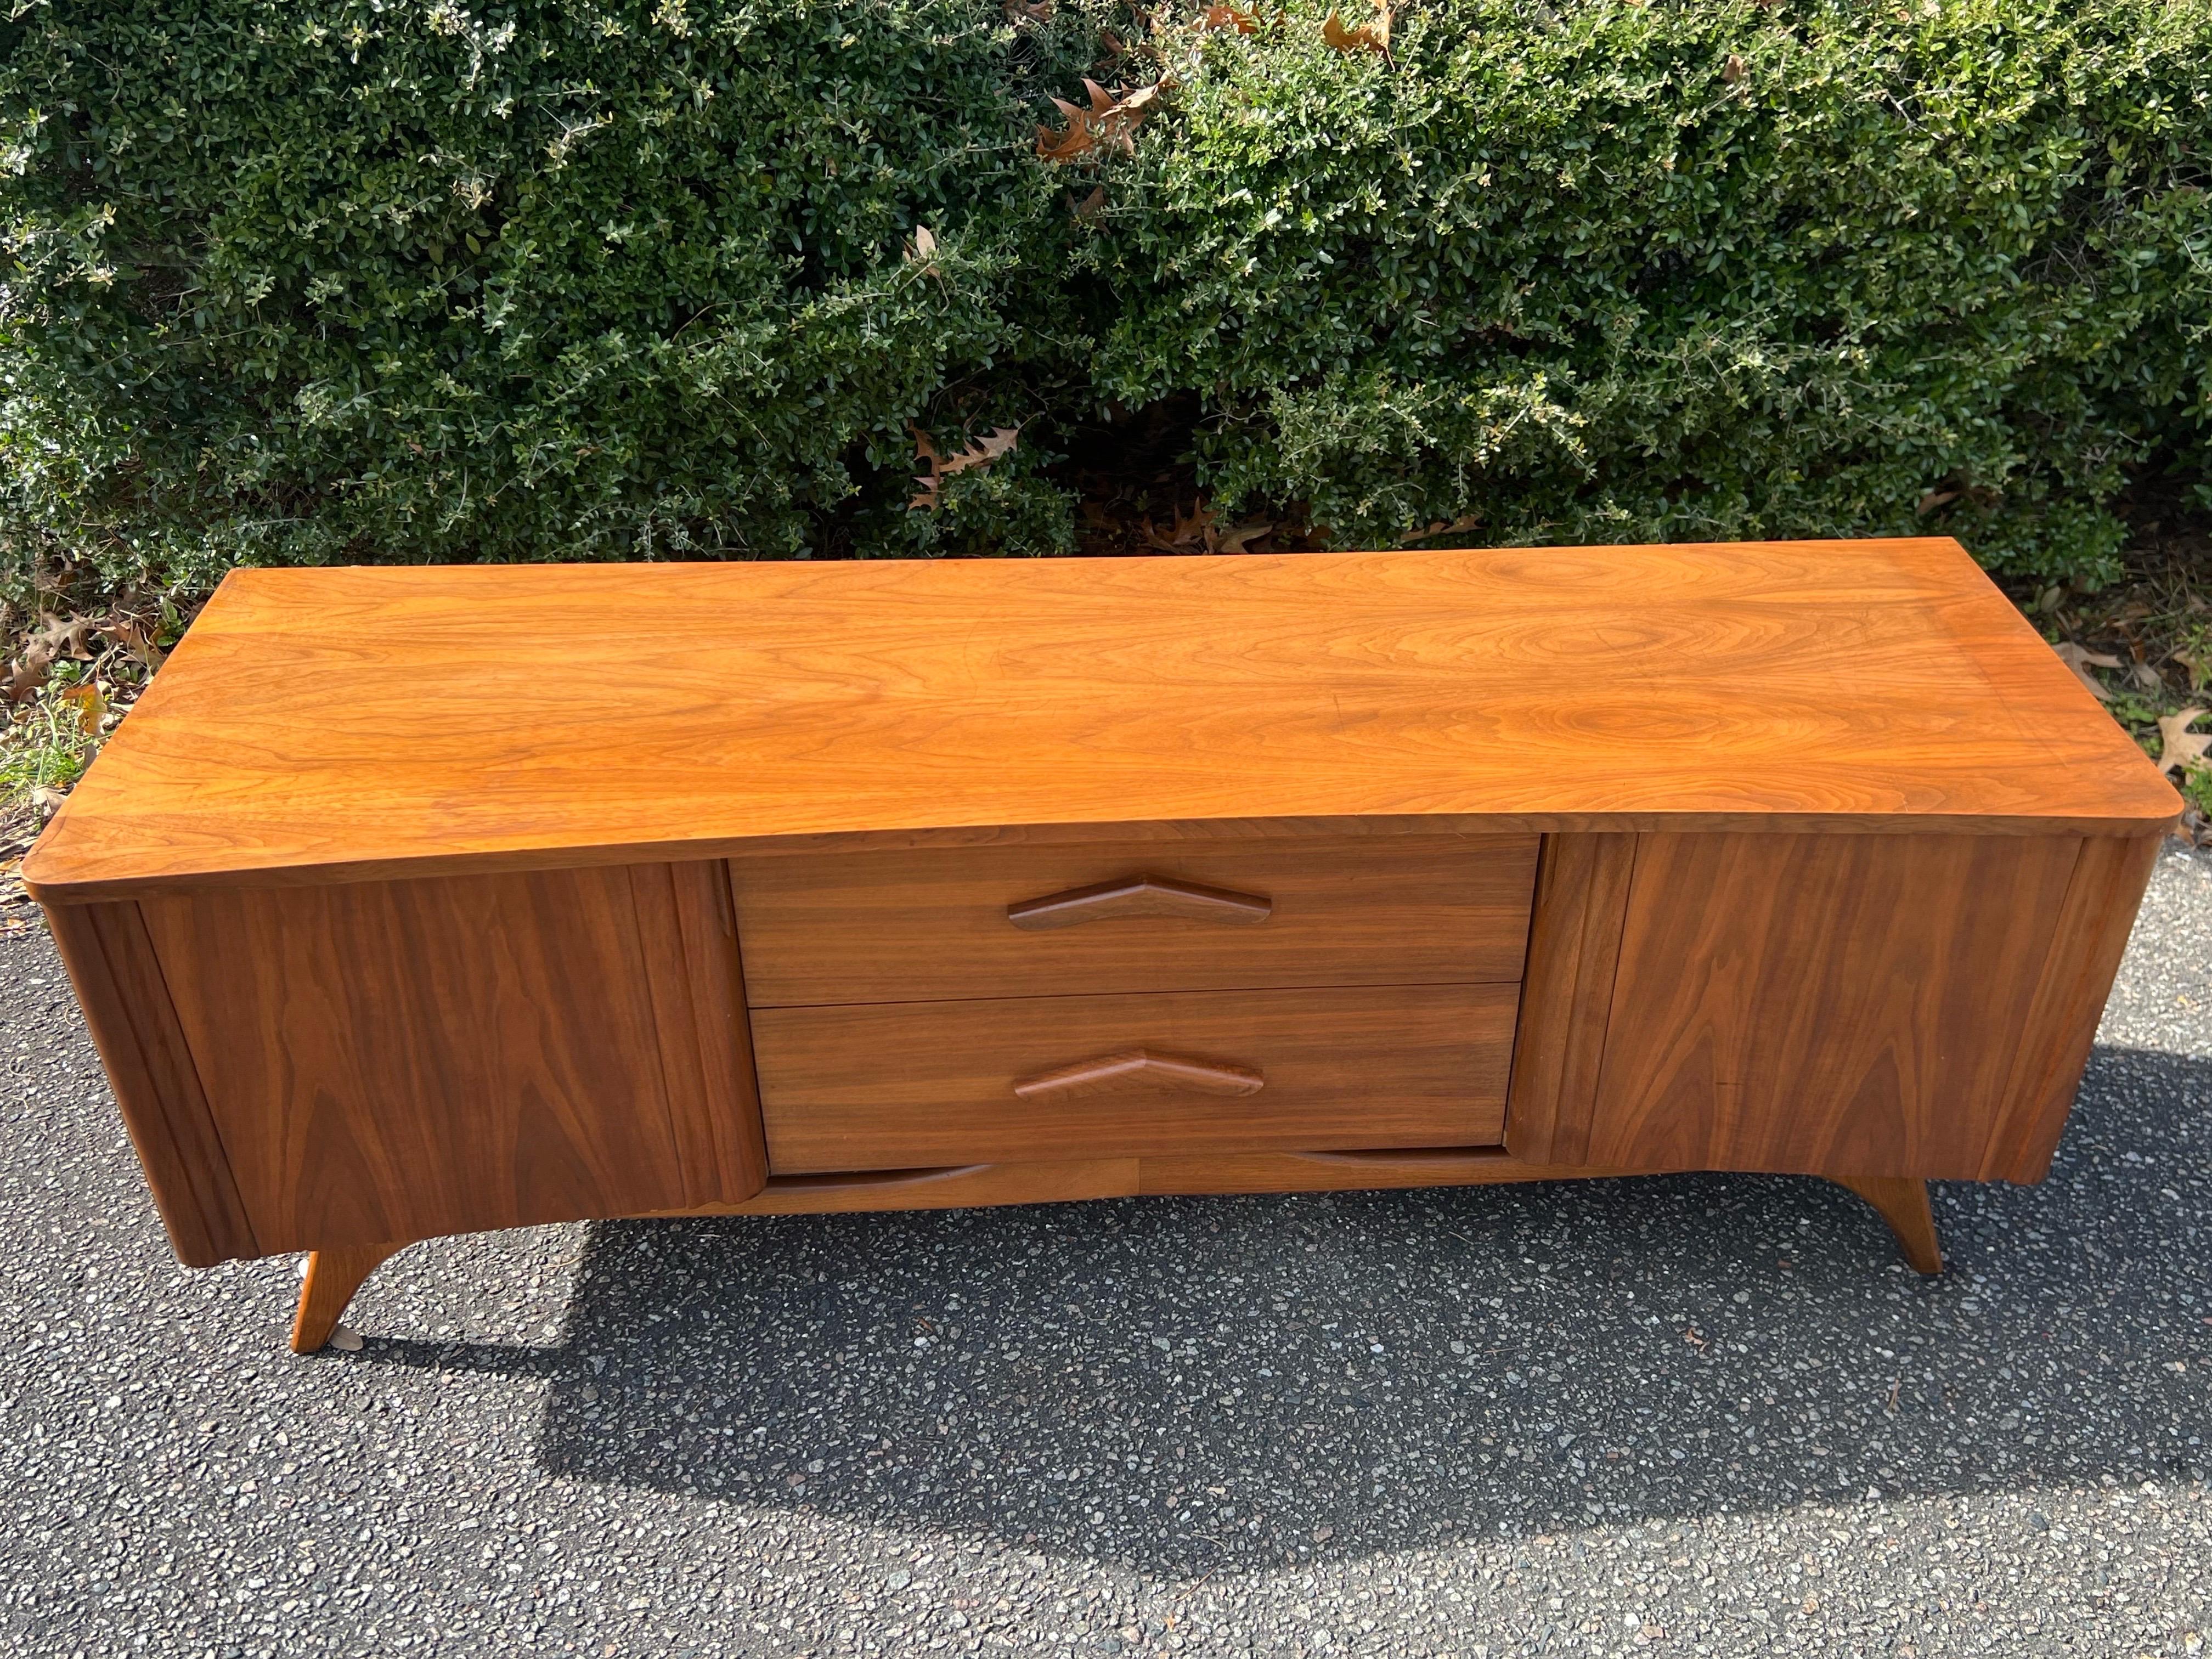 Impressive curved ‘boomerang’ walnut dresser by Young Manufacturing Co.

Features

✨3 large central sliding drawers
✨two opening cabinet doors on both sides with lots of room for storage
✨carved wooden boomerang shaped drawer pulls
✨curvilinear